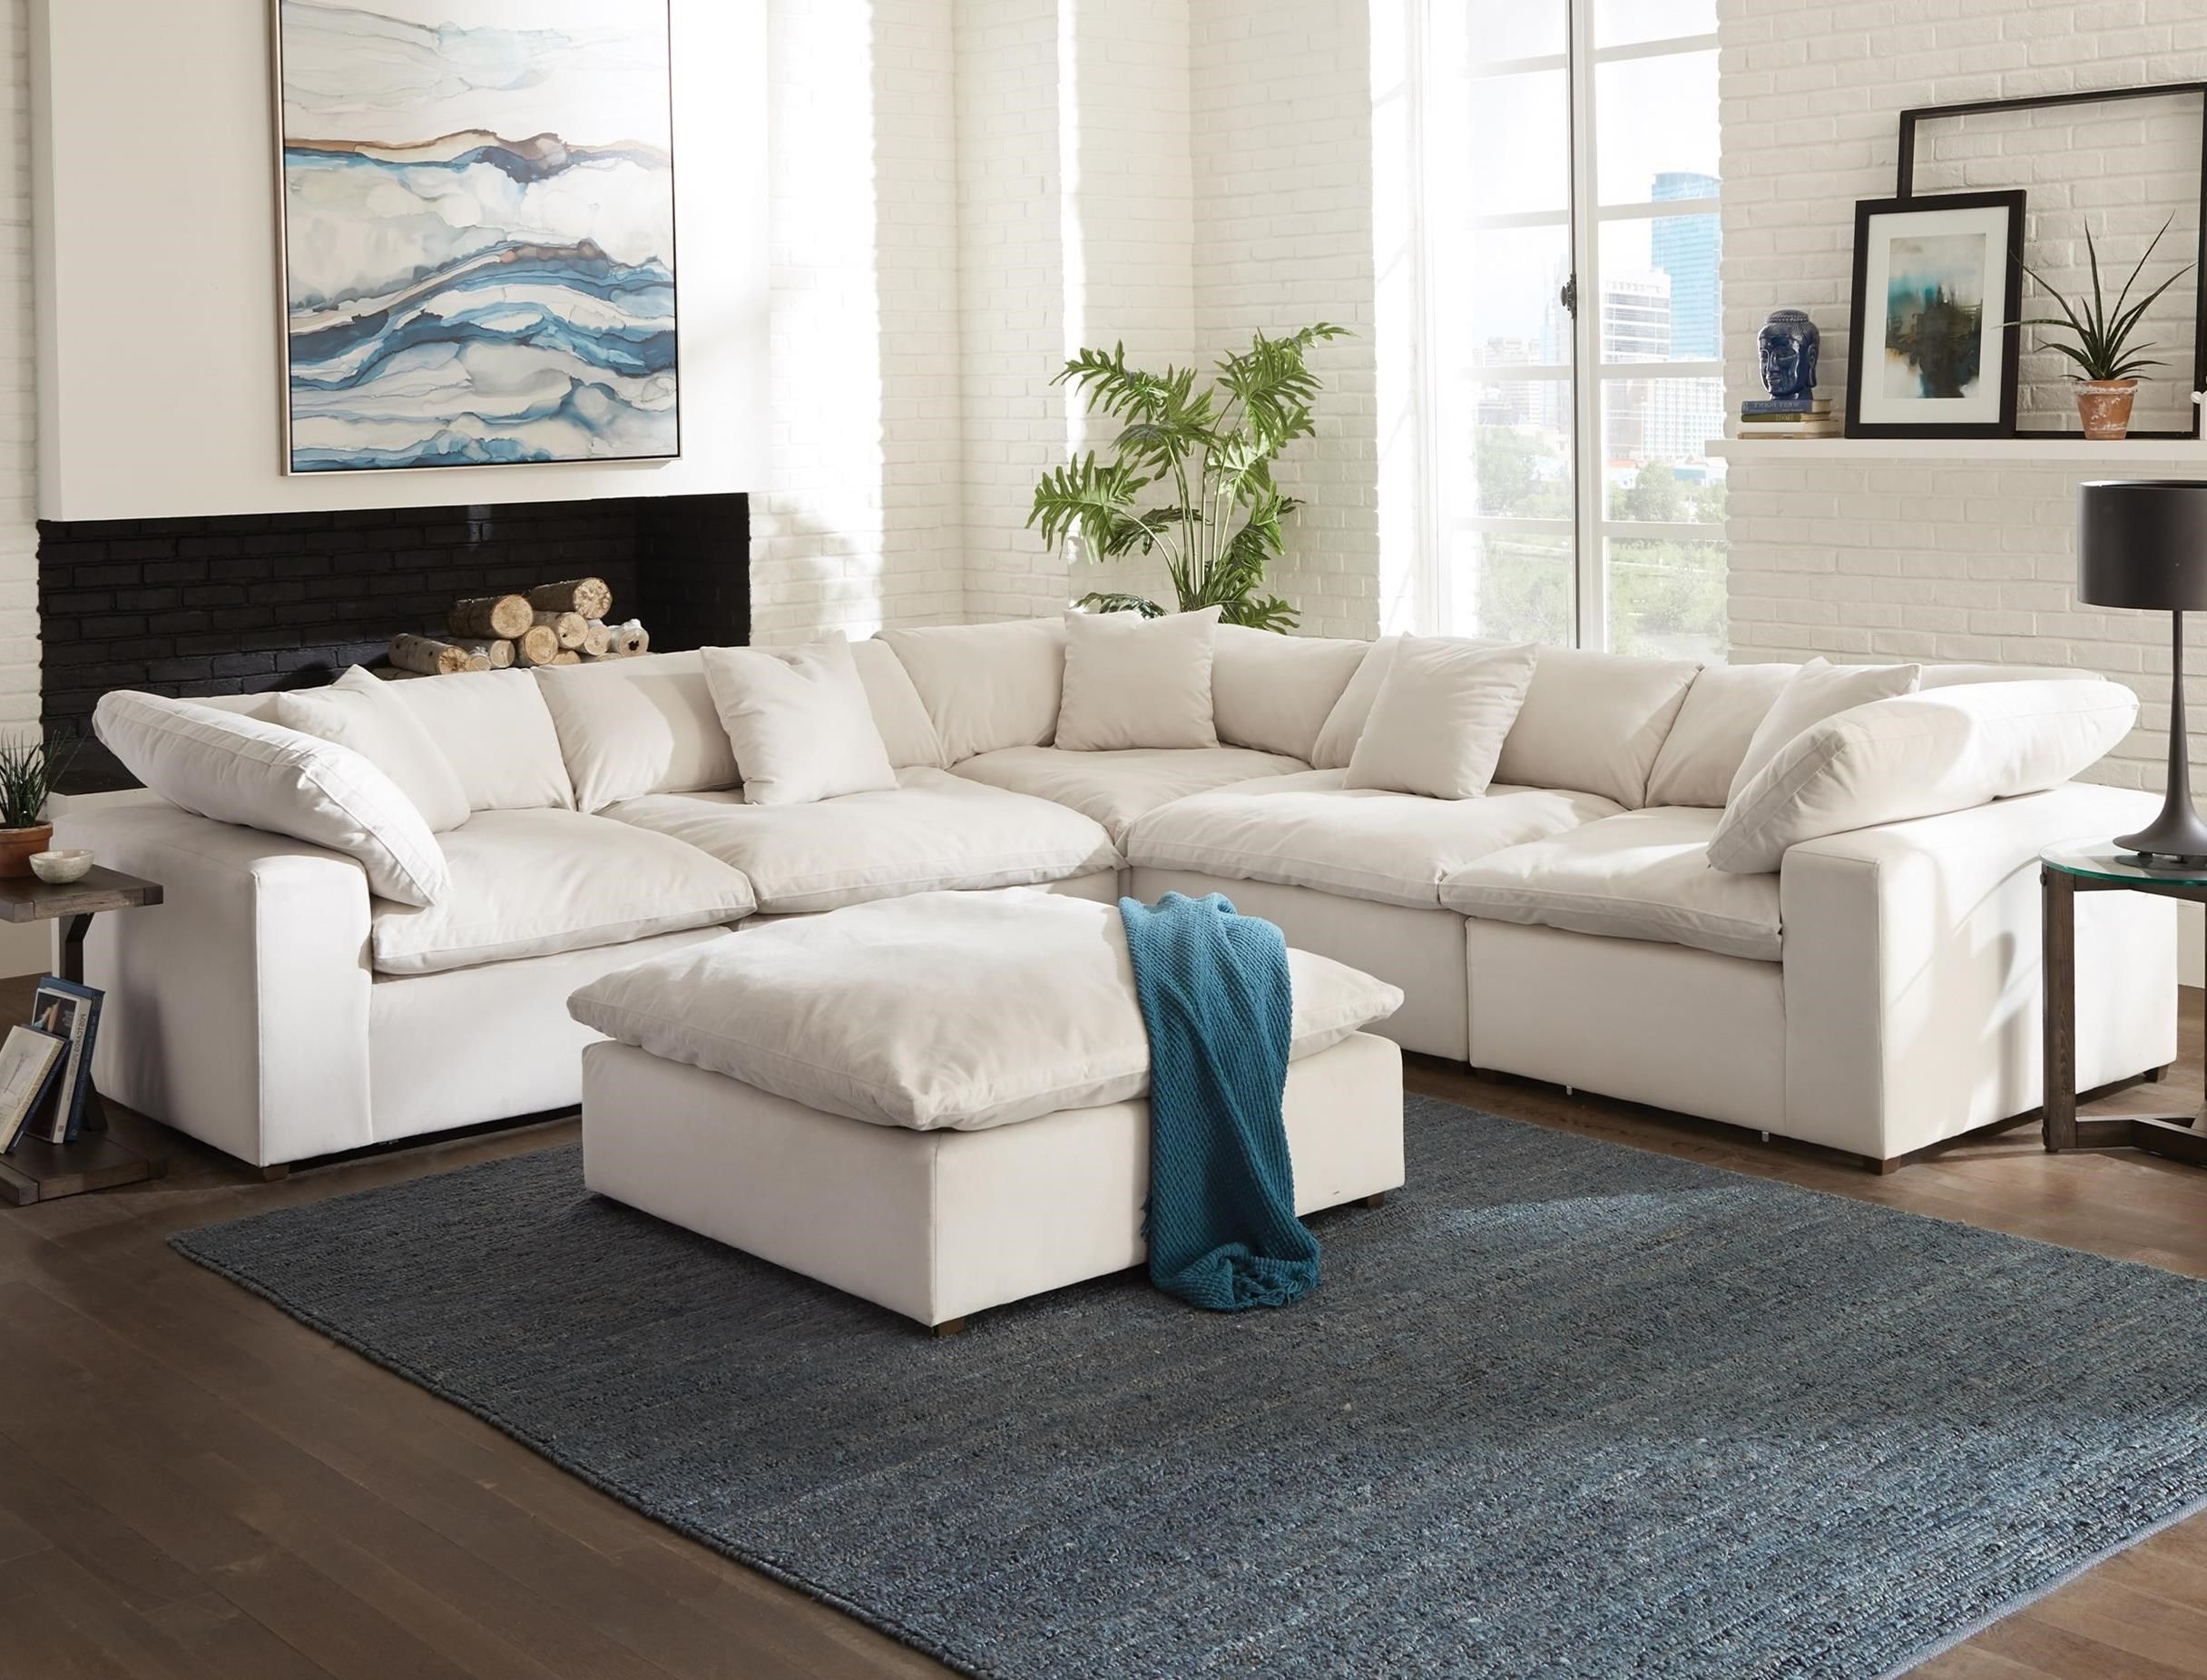 Popular Modern L Shaped Sofa Sectionals Regarding Jackson Furniture Posh Contemporary L Shaped Sectional Sofa (View 10 of 15)